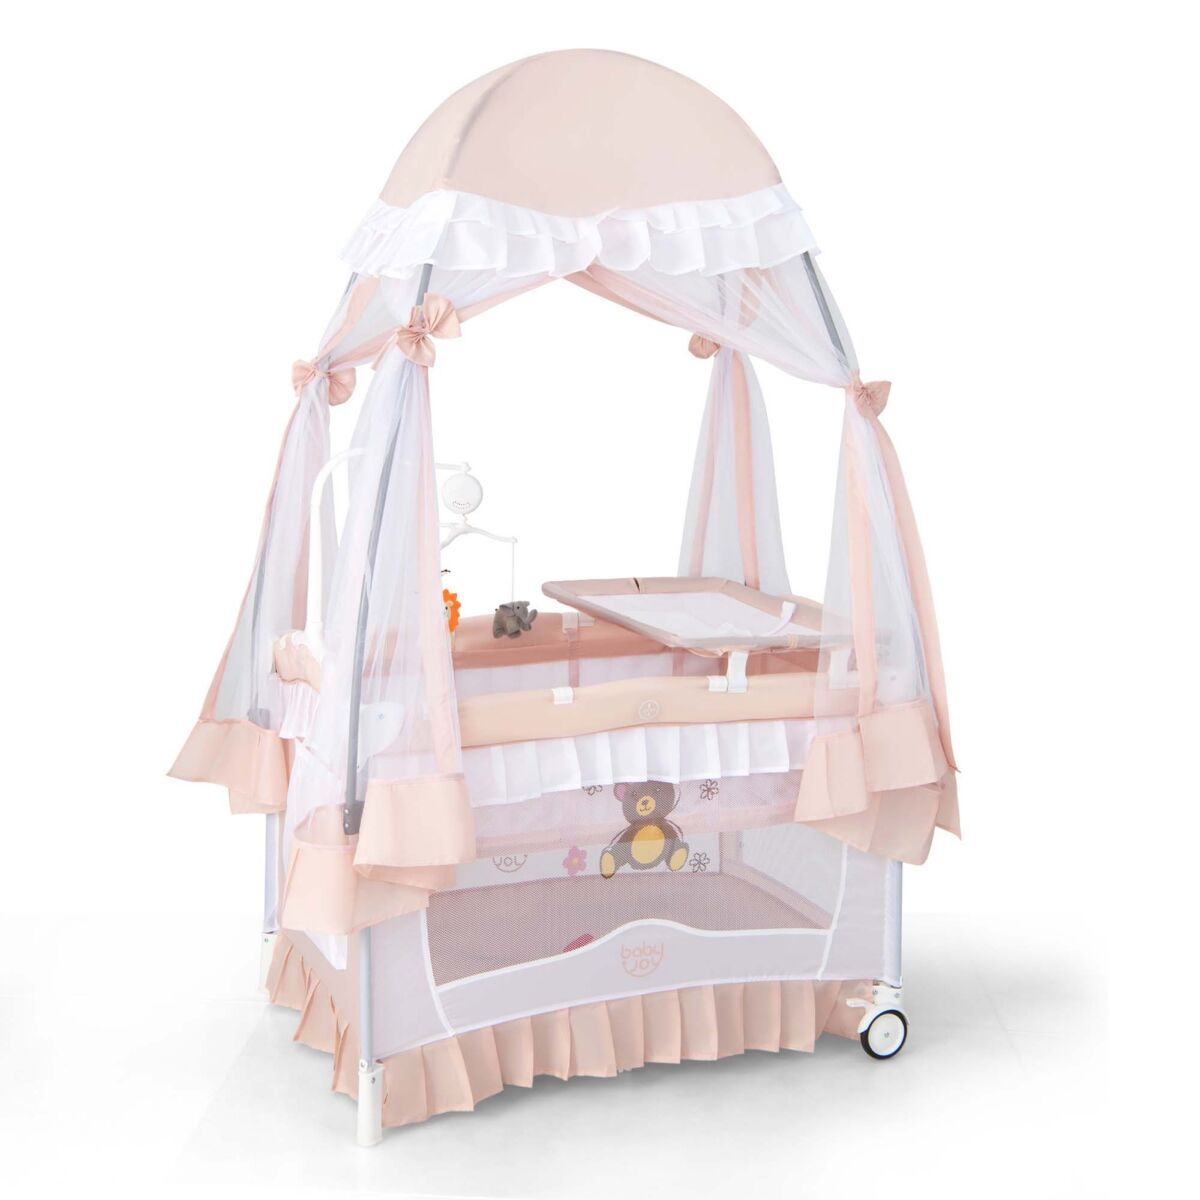 Costway Portable Baby Playpen Crib Cradle Changing Pad Mosquito Net Toys - Pink